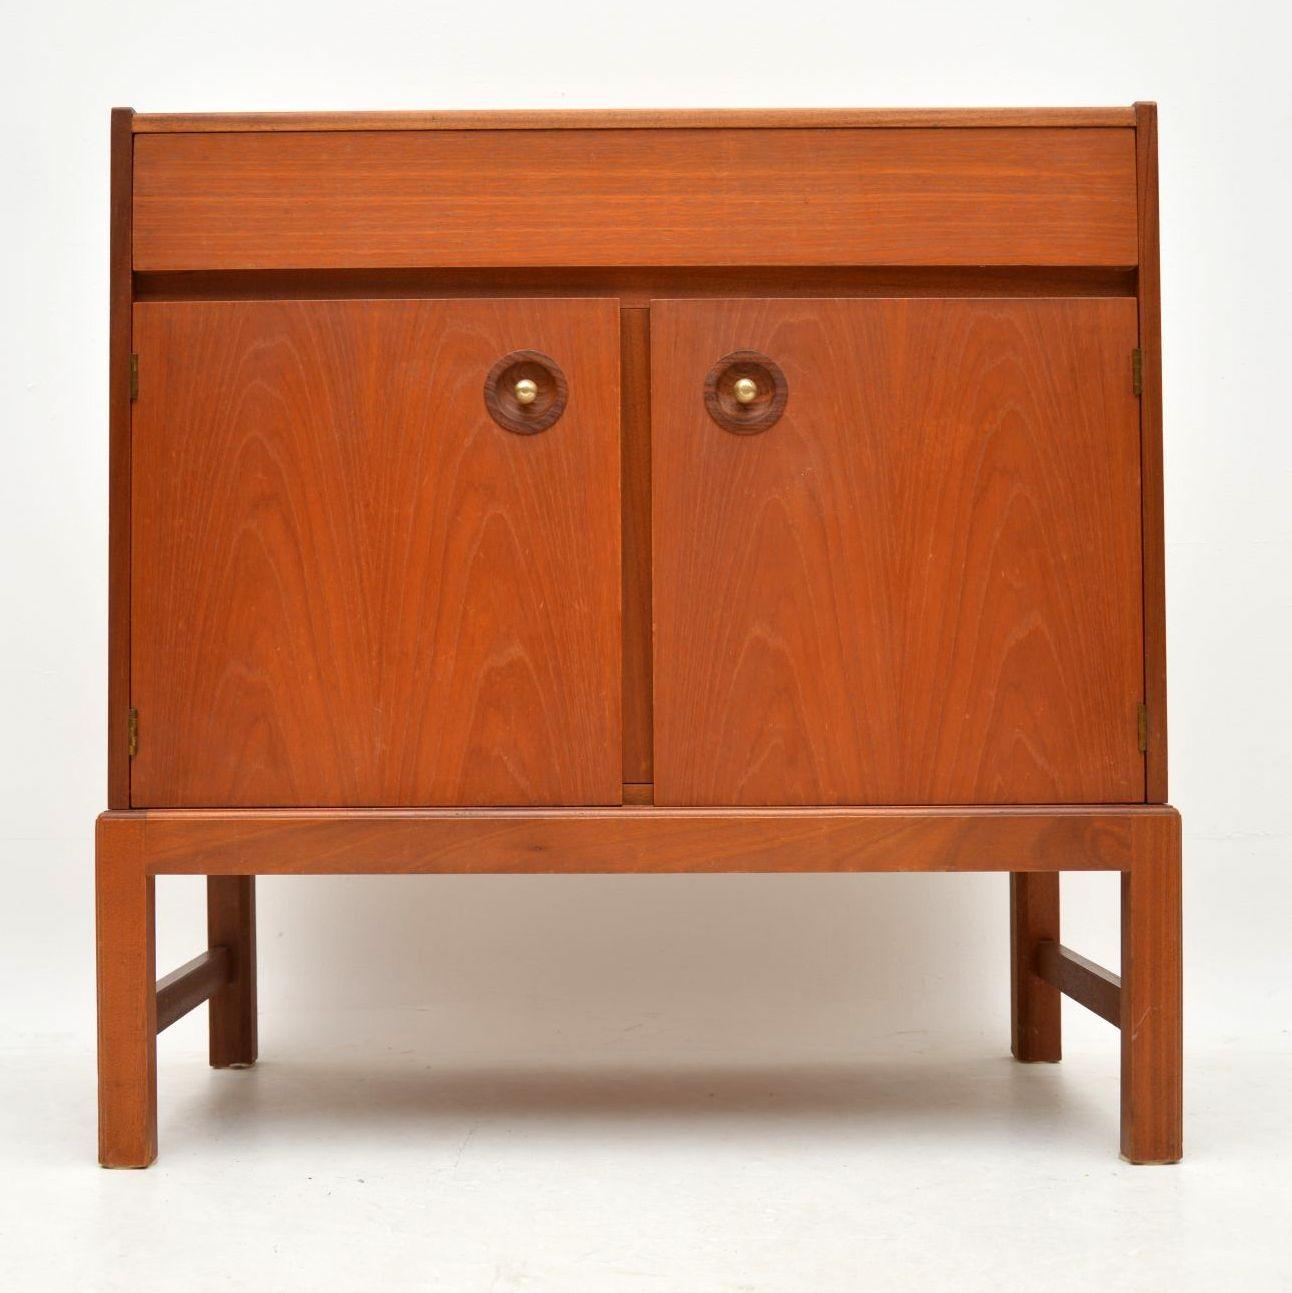 A stylish, very well made and practical little cabinet in teak, this was made by McIntosh, it dates from the 1960s. The condition is excellent for its age, there is just some minor wear to the polish on the top.

Measure: Width – 75 cm, 30